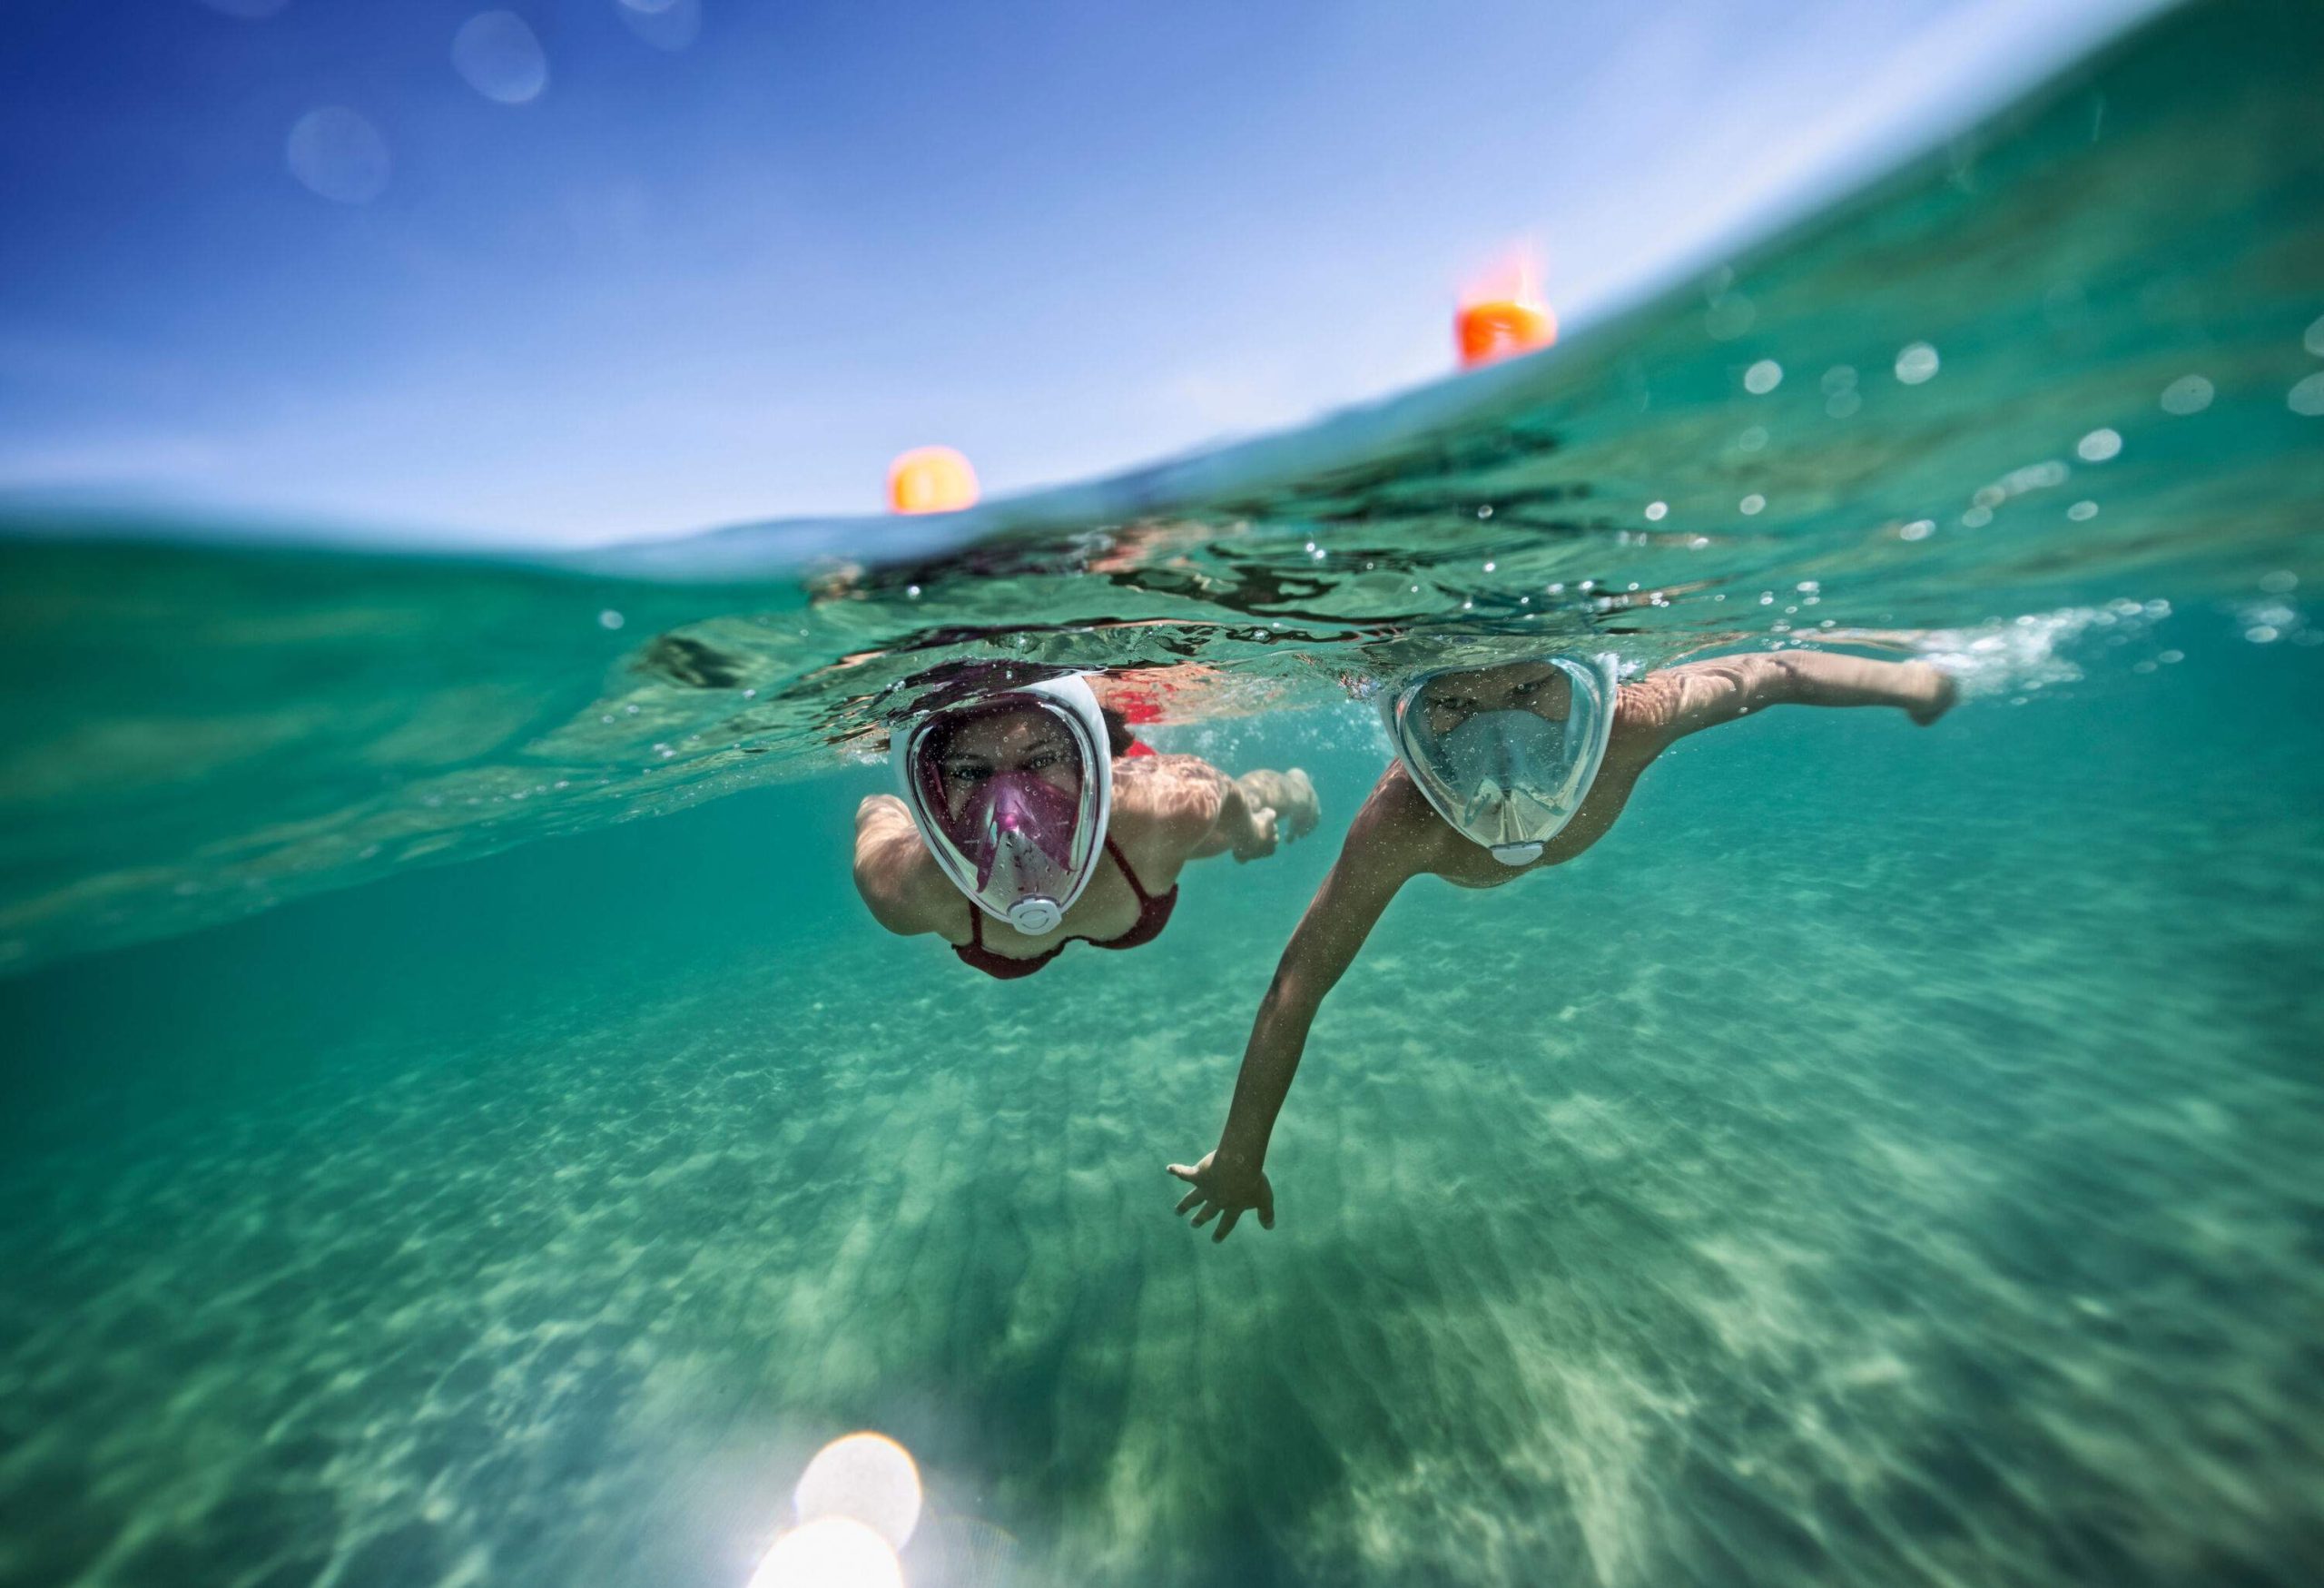 A boy and a girl in full-face snorkel masks swimming below the sea's surface under the cloudless sky.